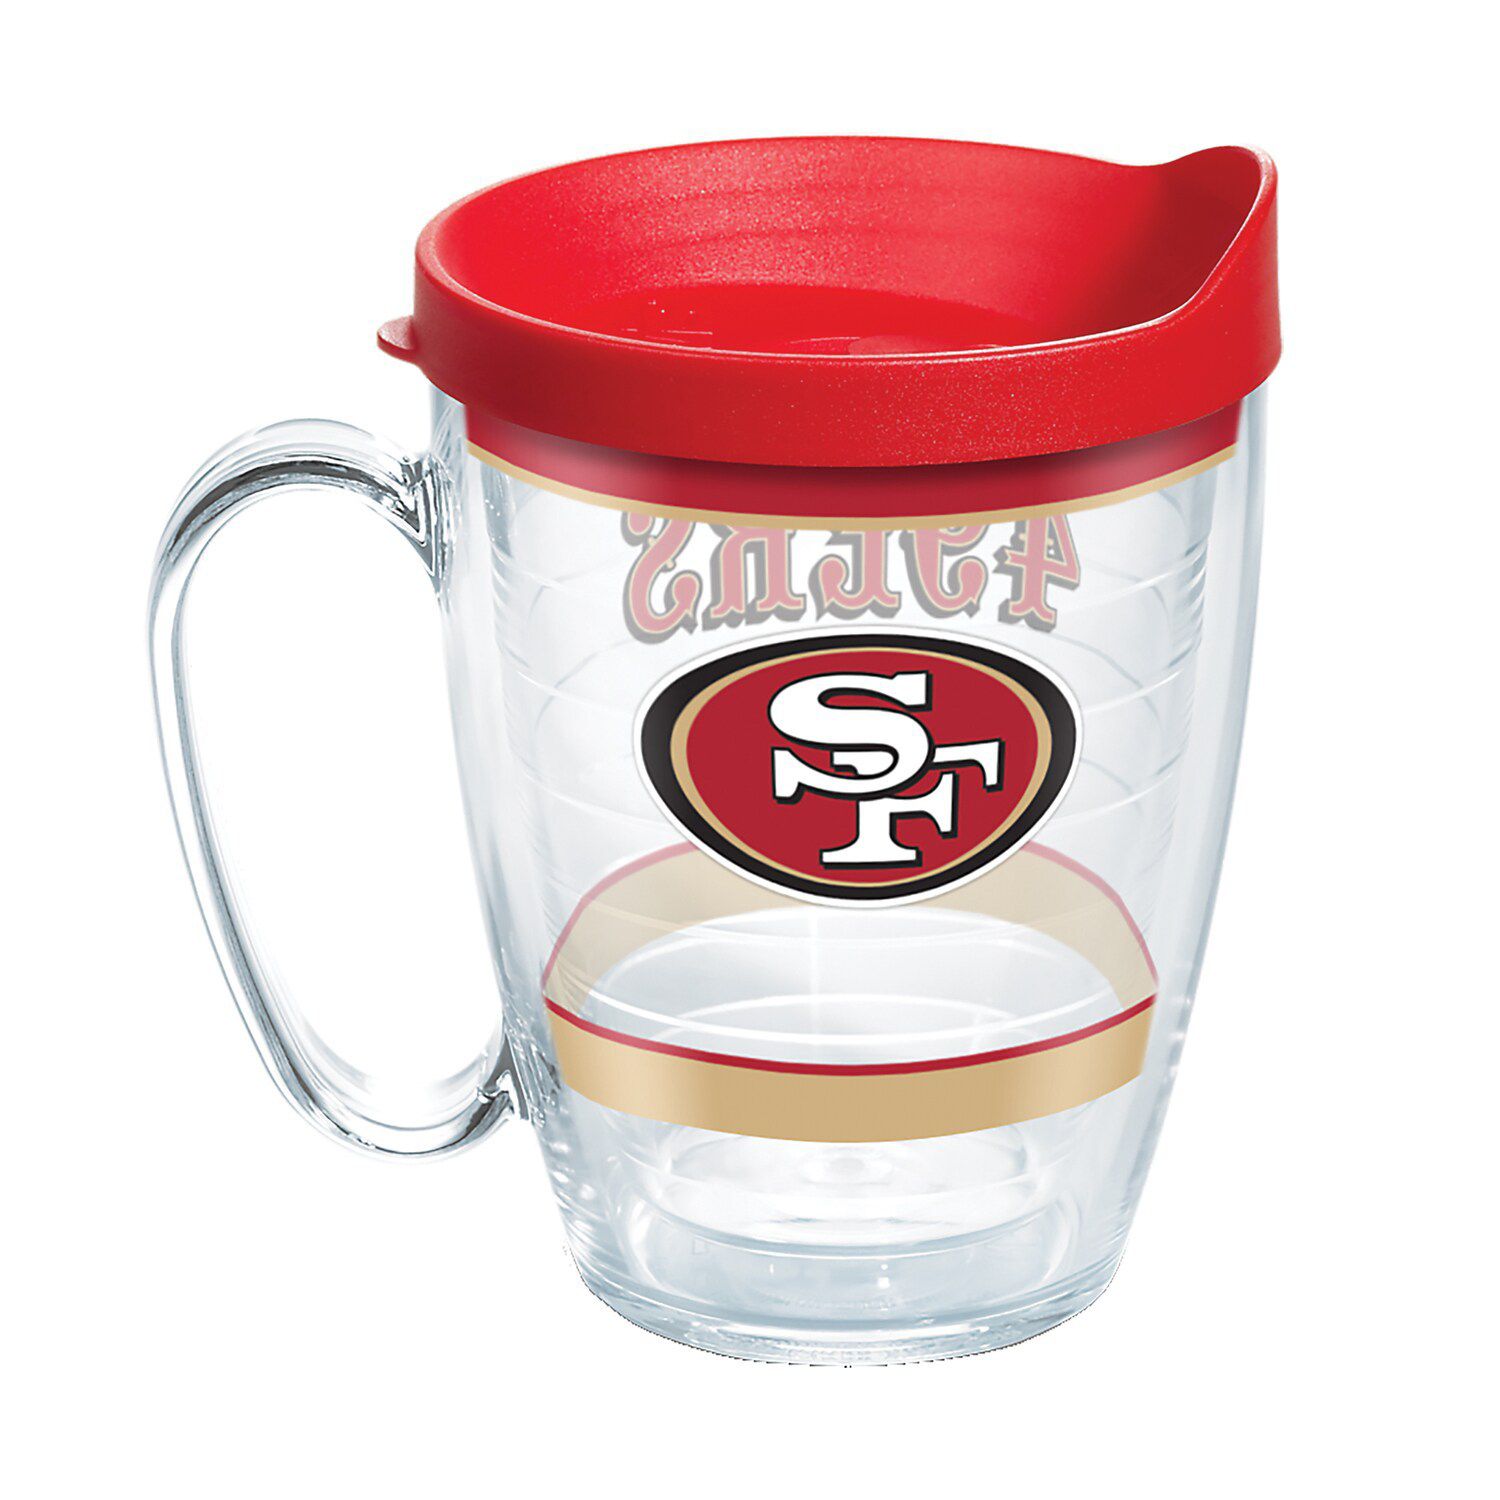 San Francisco 49ers Water Bottle Wrappers — Printable Treats.com